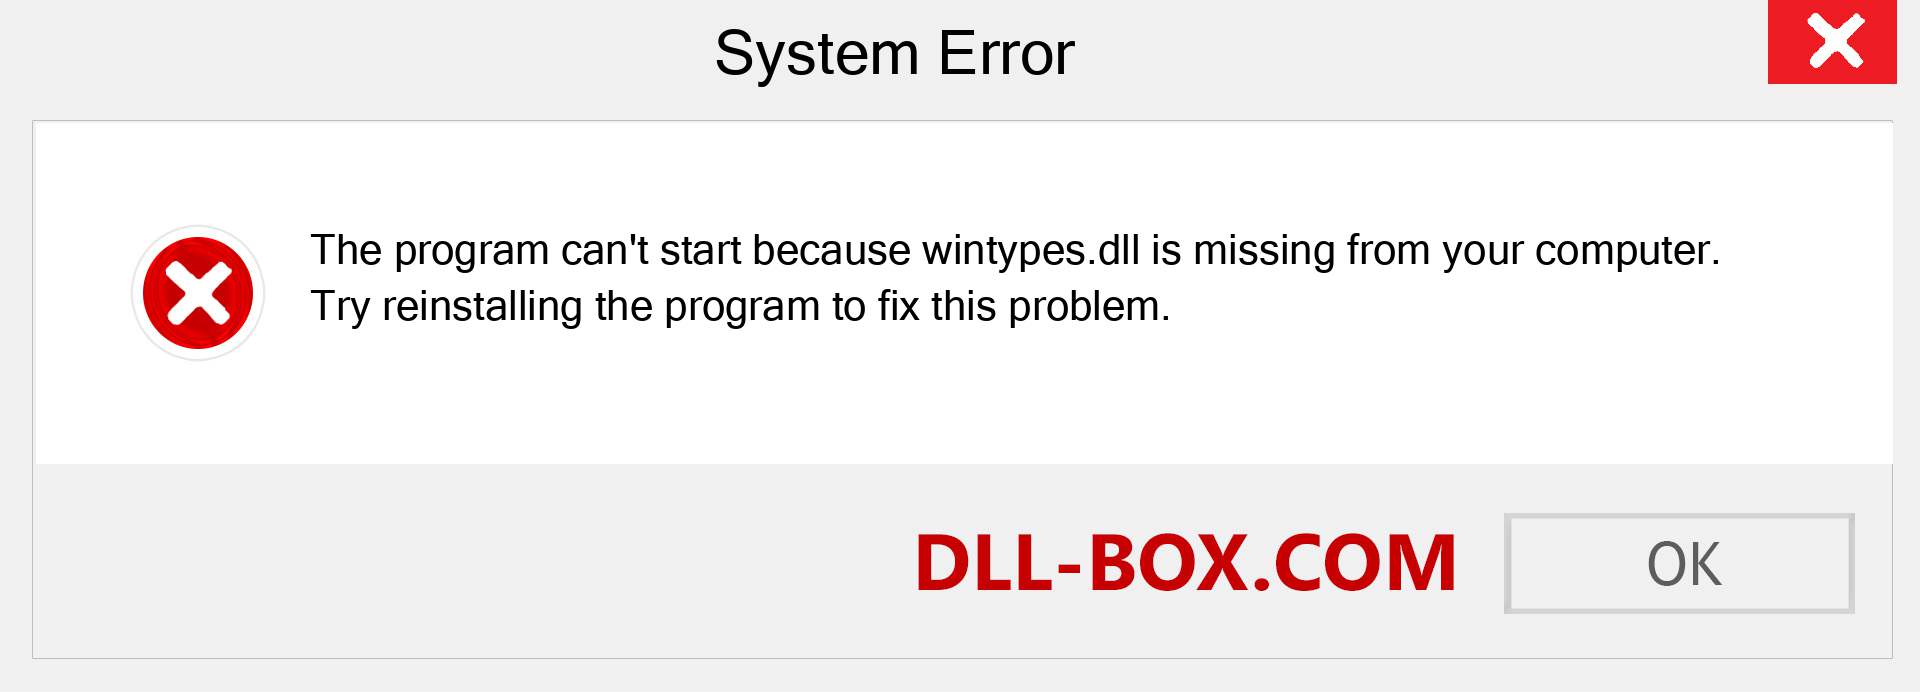  wintypes.dll file is missing?. Download for Windows 7, 8, 10 - Fix  wintypes dll Missing Error on Windows, photos, images